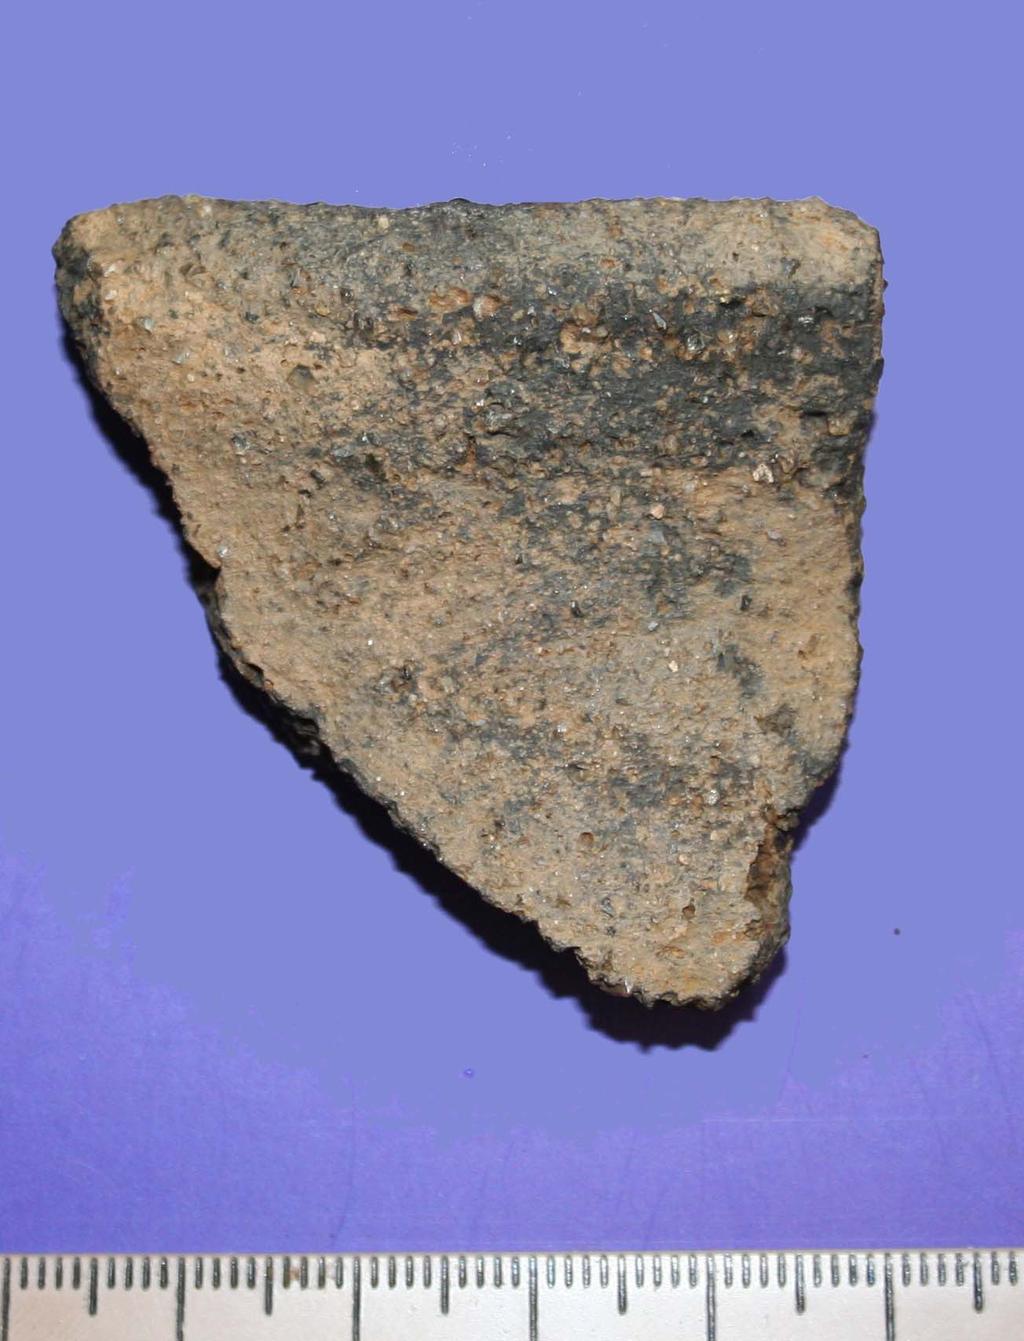 Vessel 4 A body sherd of coarse pottery. This sherd is 4mm thick and is light orange-brown. It has what appear to be crushed flint and mica inclusions.